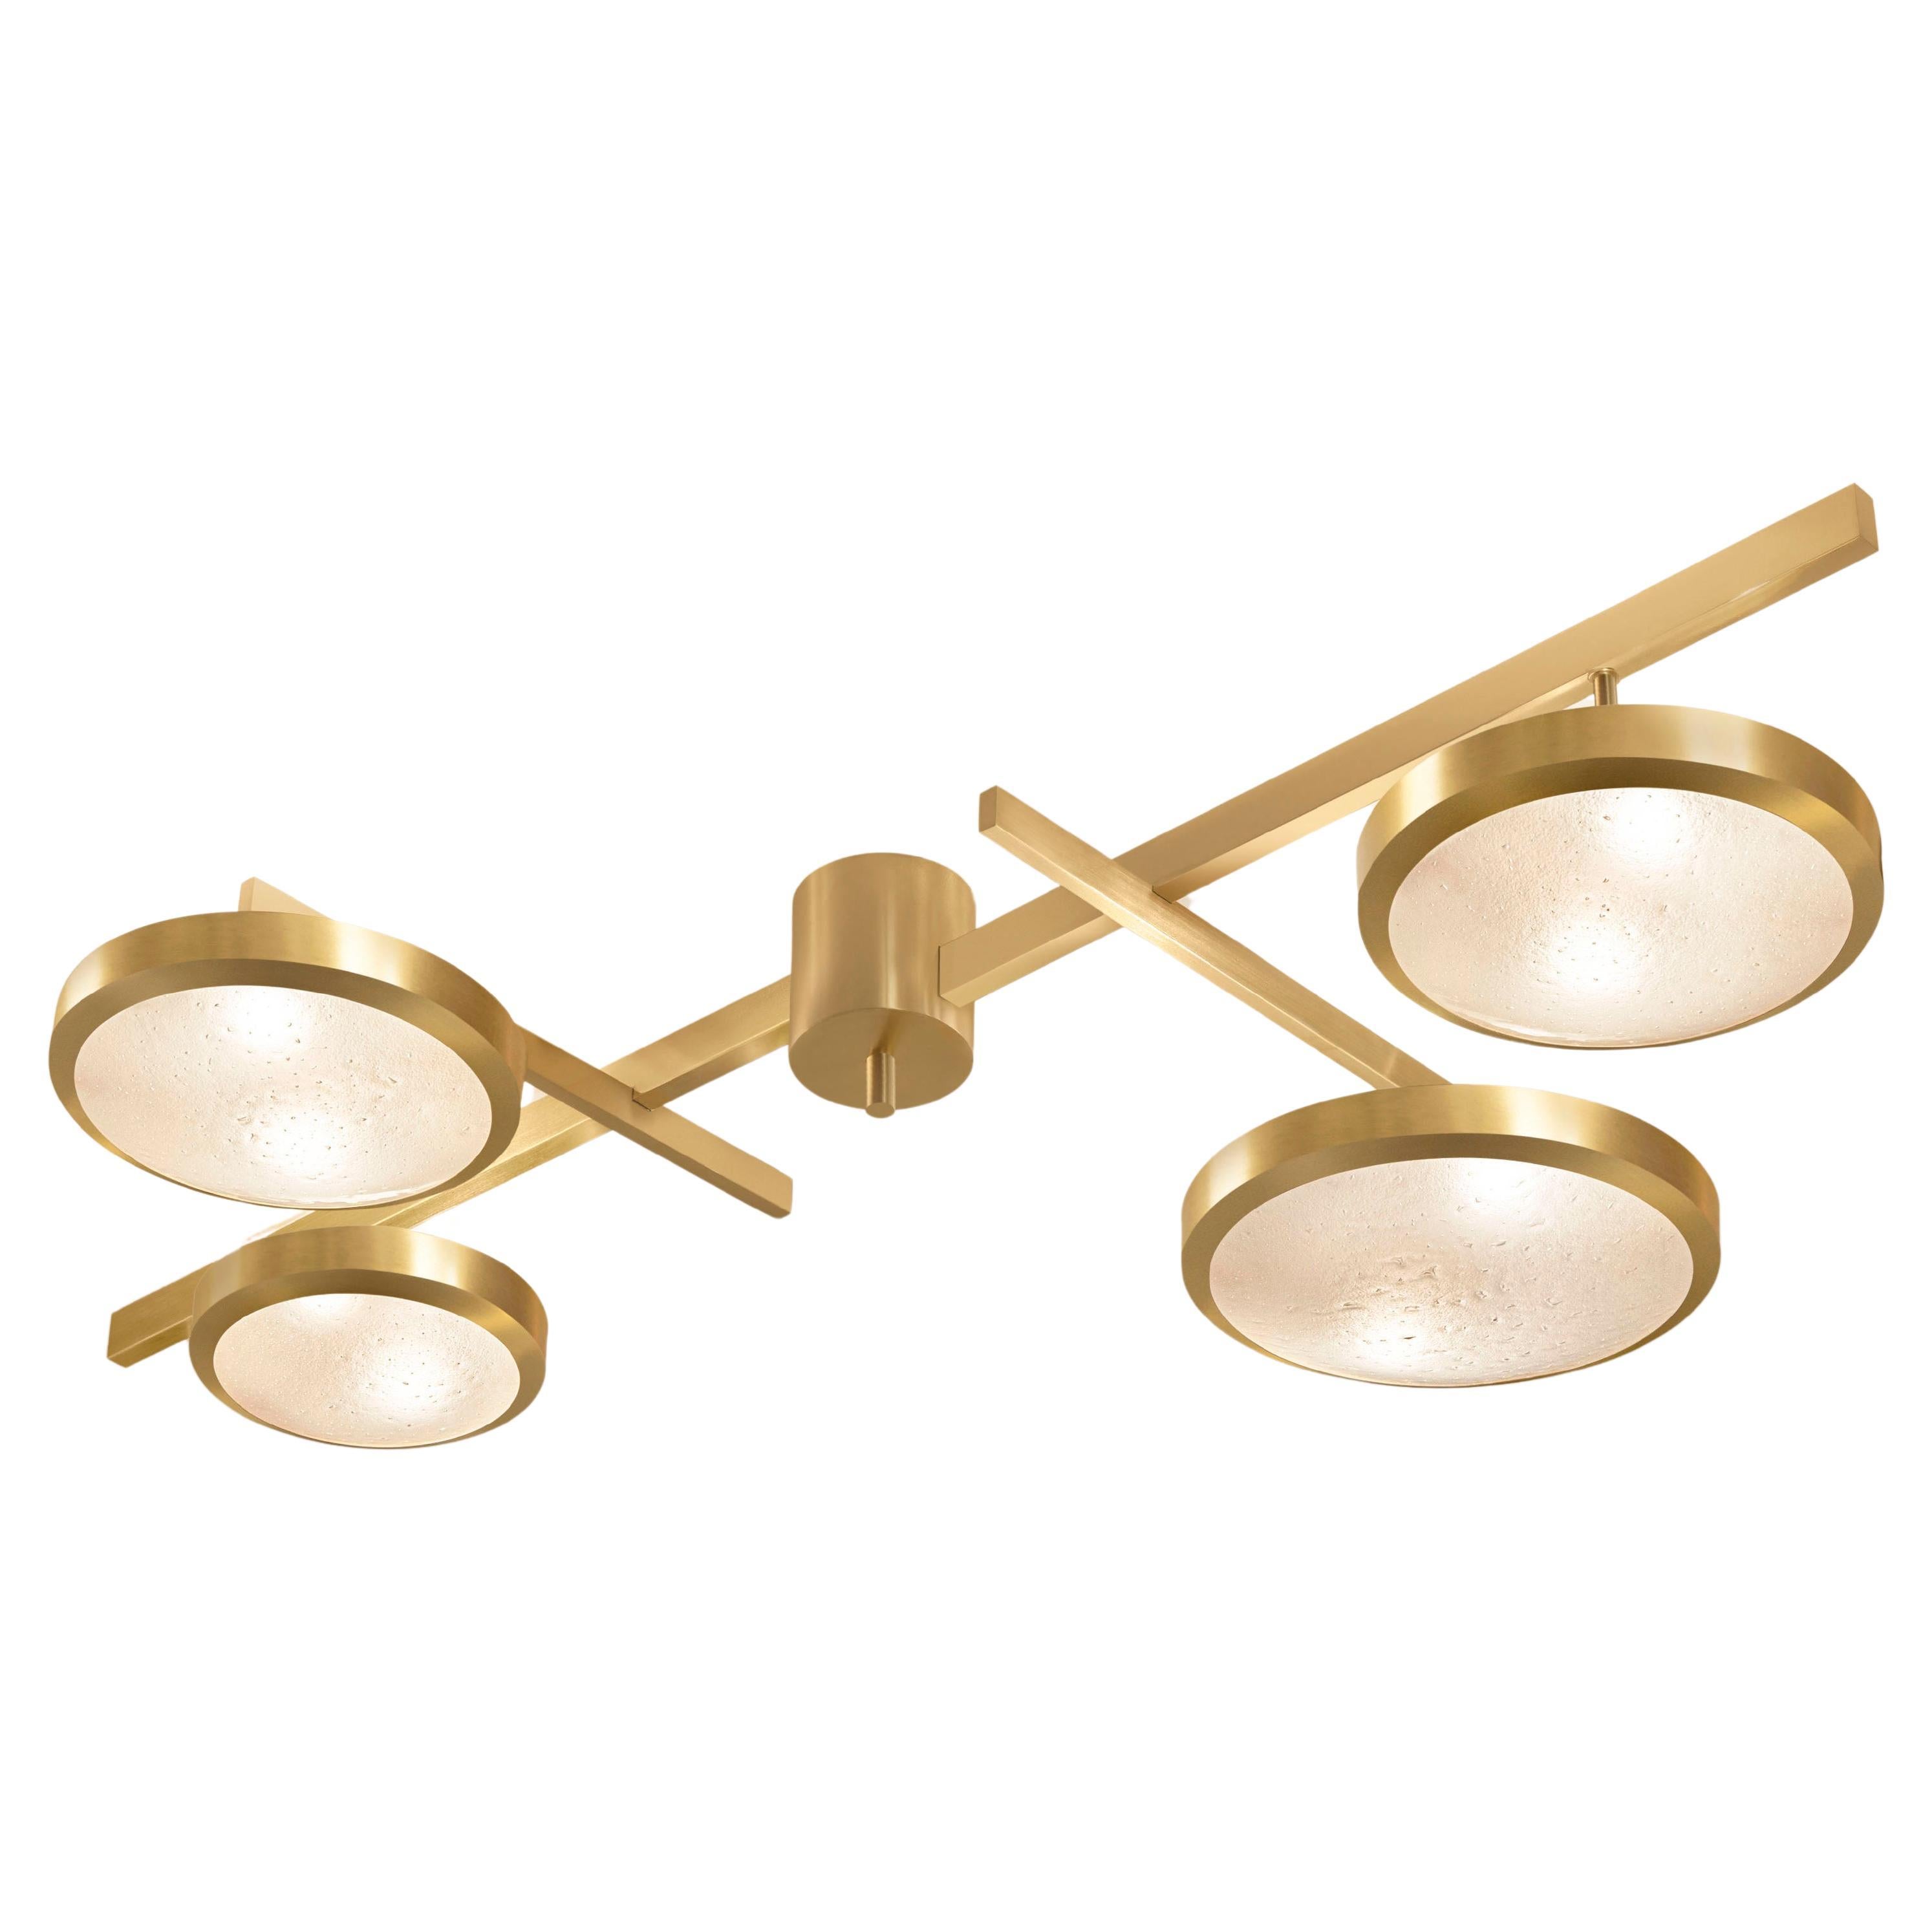 Tetrix Ceiling Light by Gaspare Asaro-Satin Brass Finish For Sale